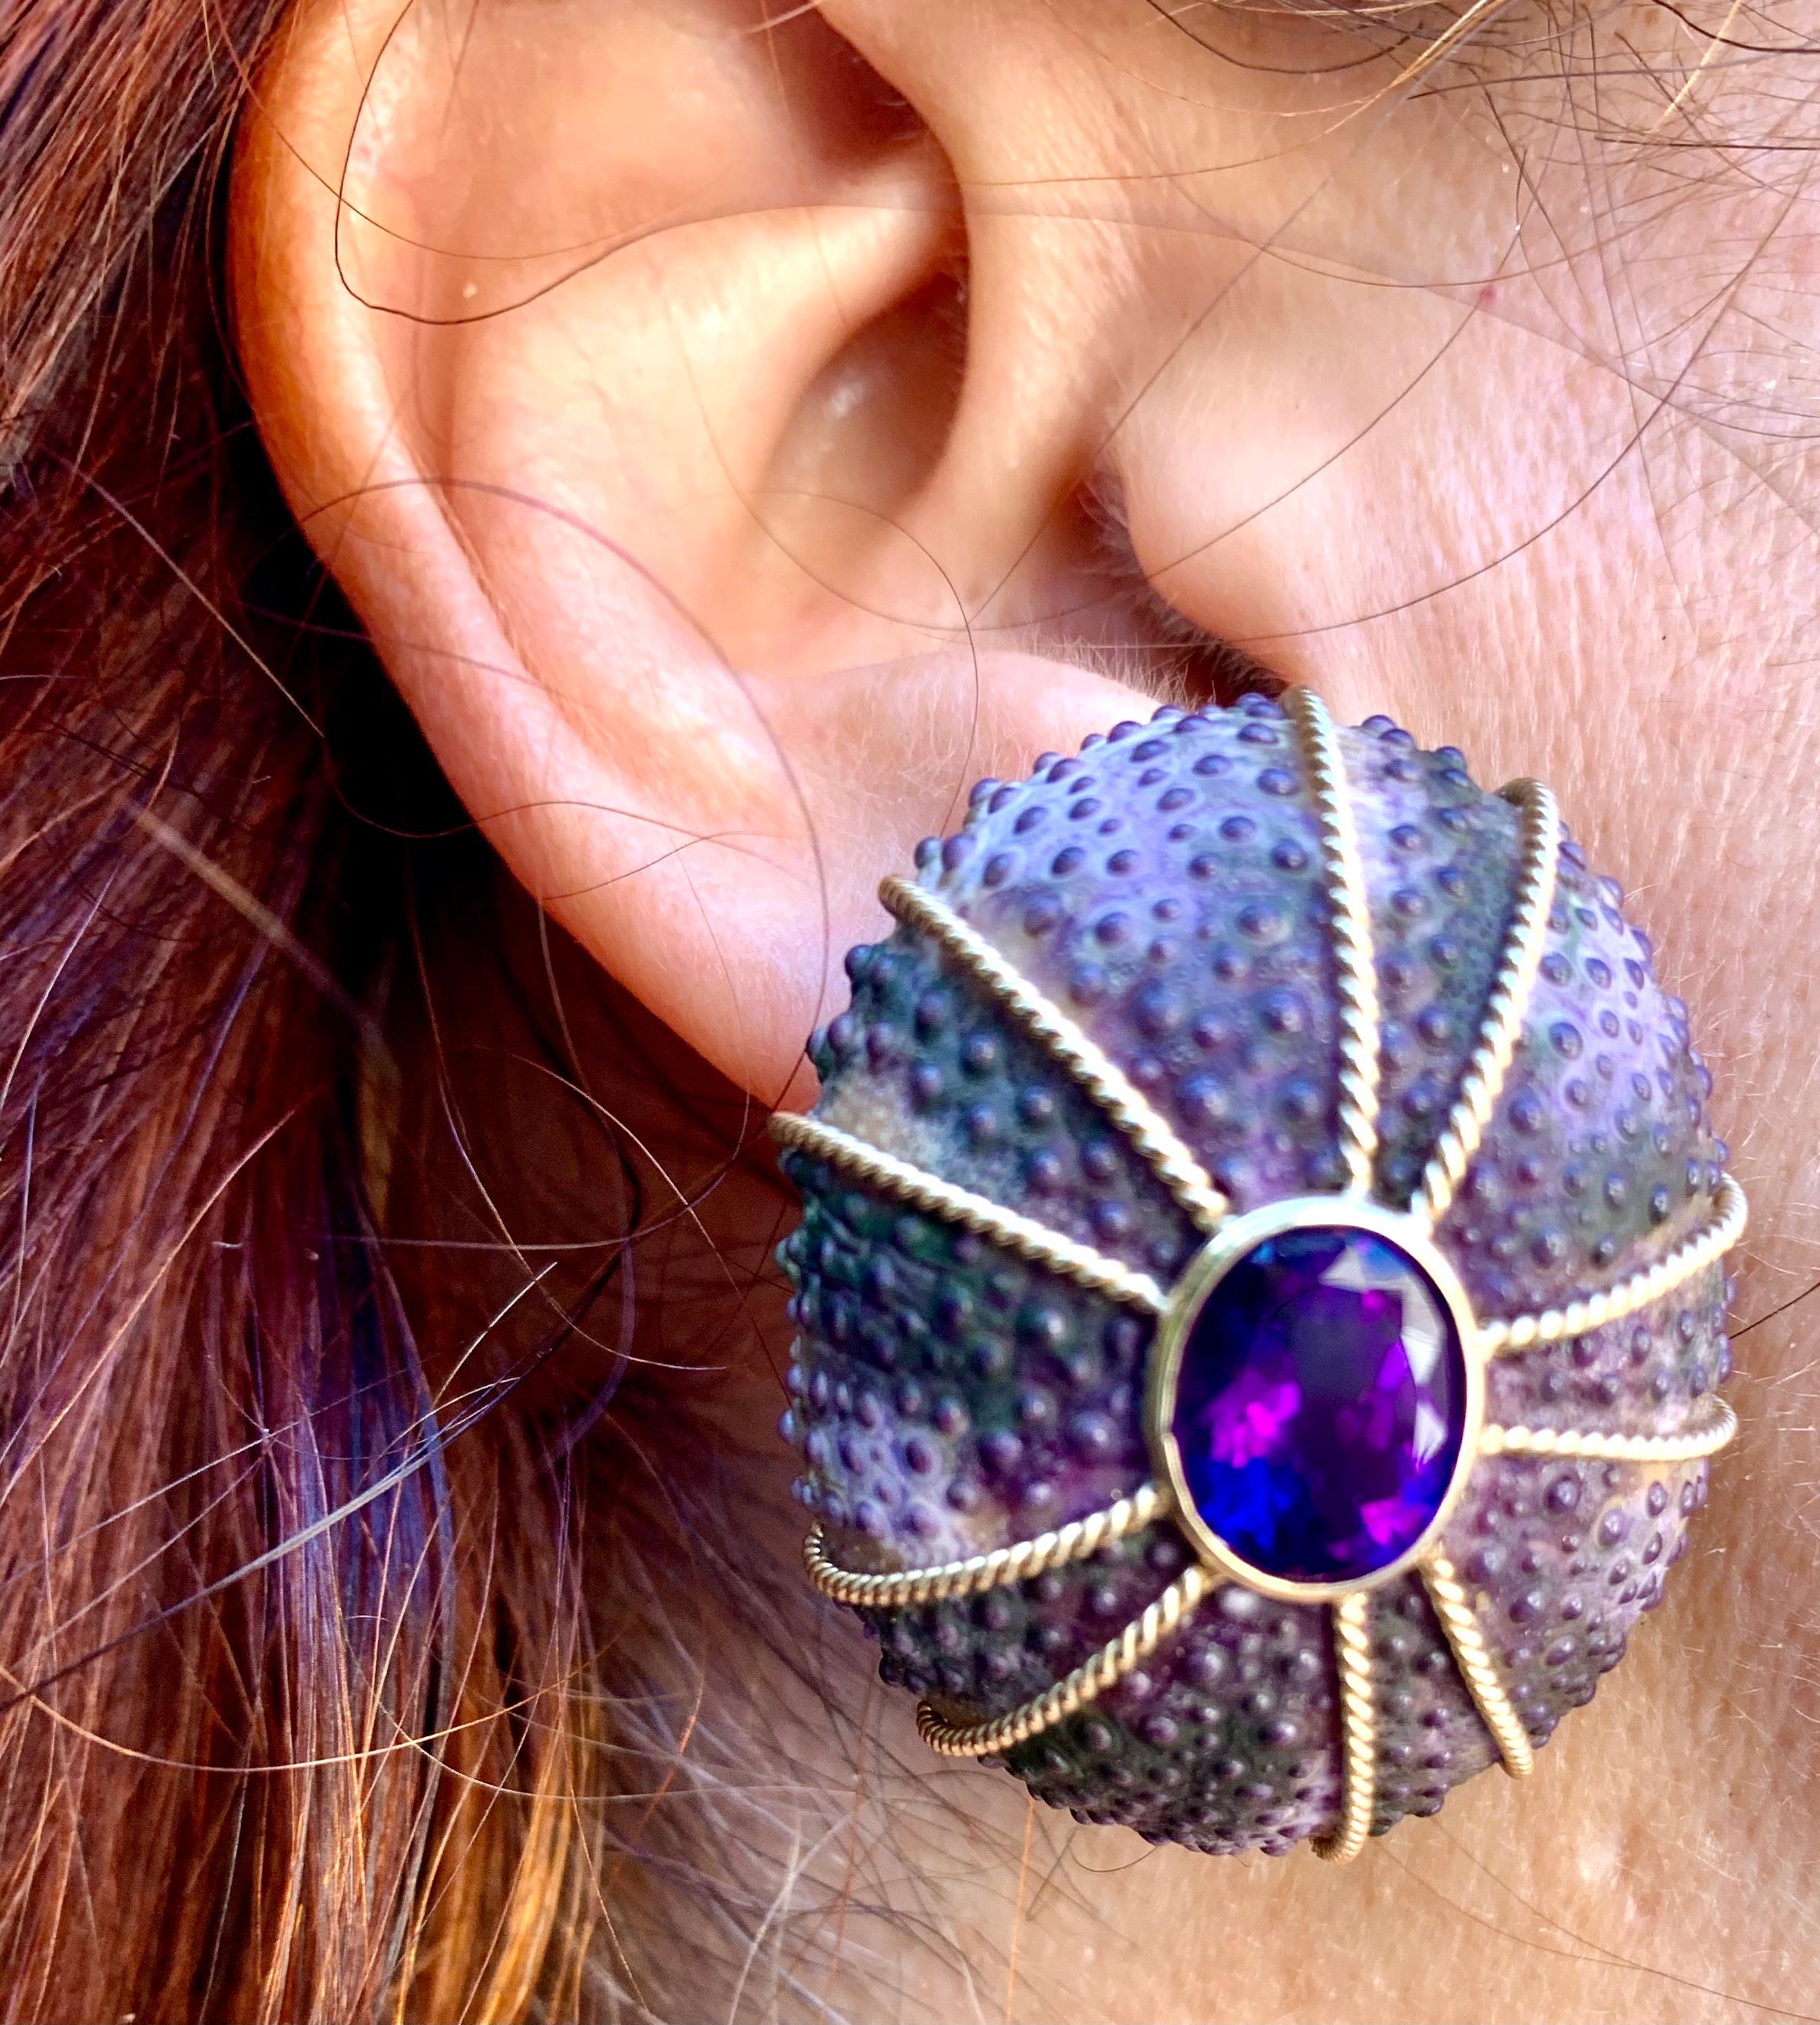 Exceptional and unique purple sea urchin, 14K gold and oval faceted cut amethyst earrings by Maz
20th Century
The sea urchin with lovely ombre color variation, deeper purple in the center to lighter lavender shades toward the edges, set with rope